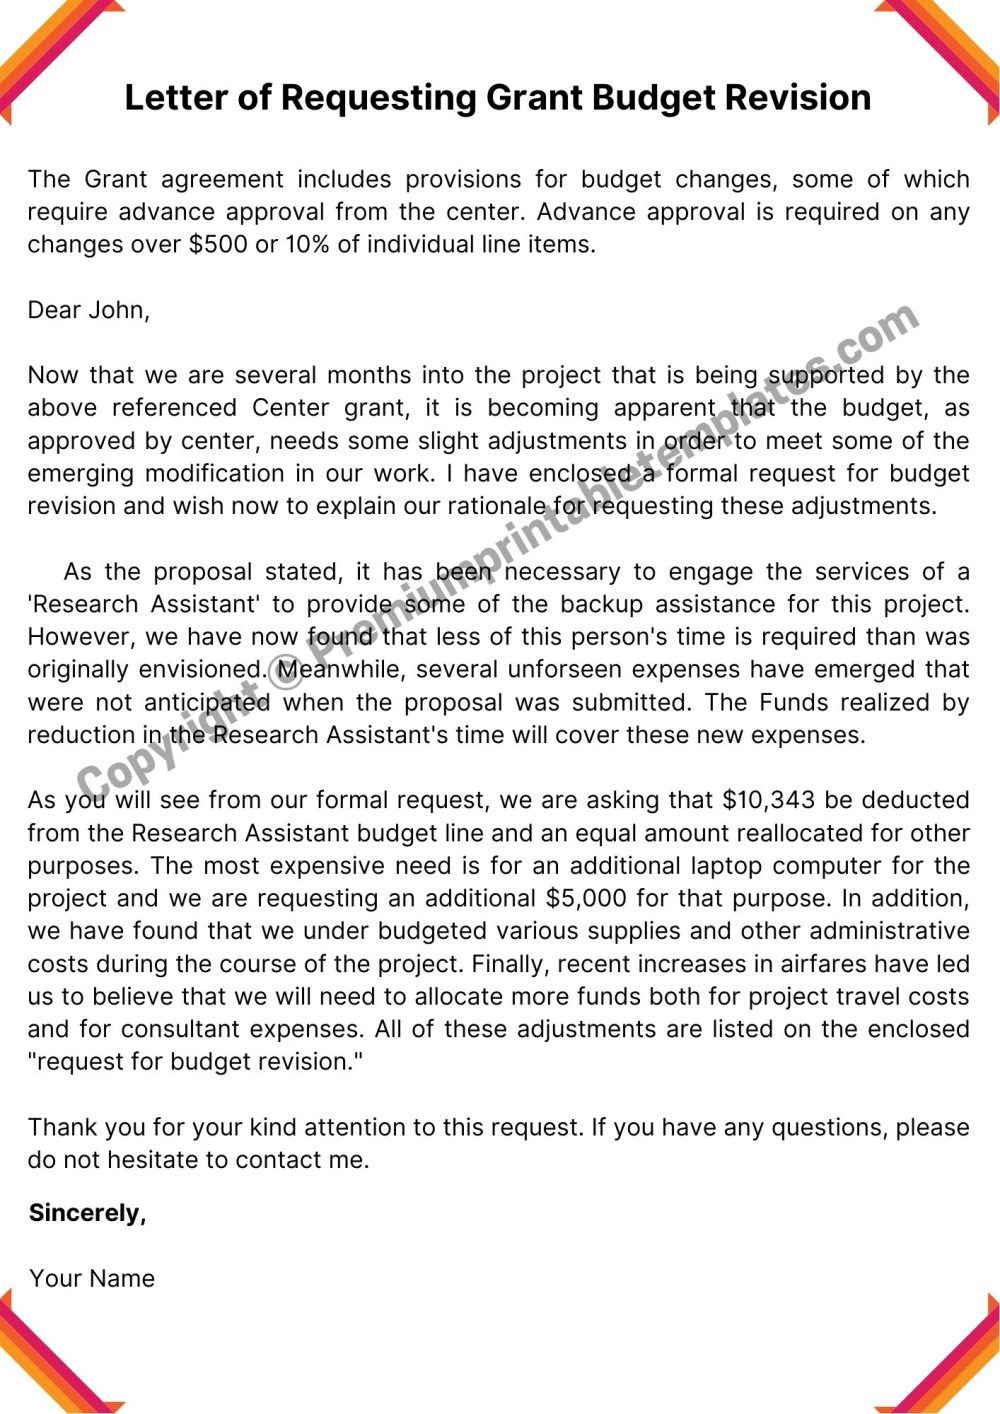 Printable letter for Requesting Grant Budget Revision